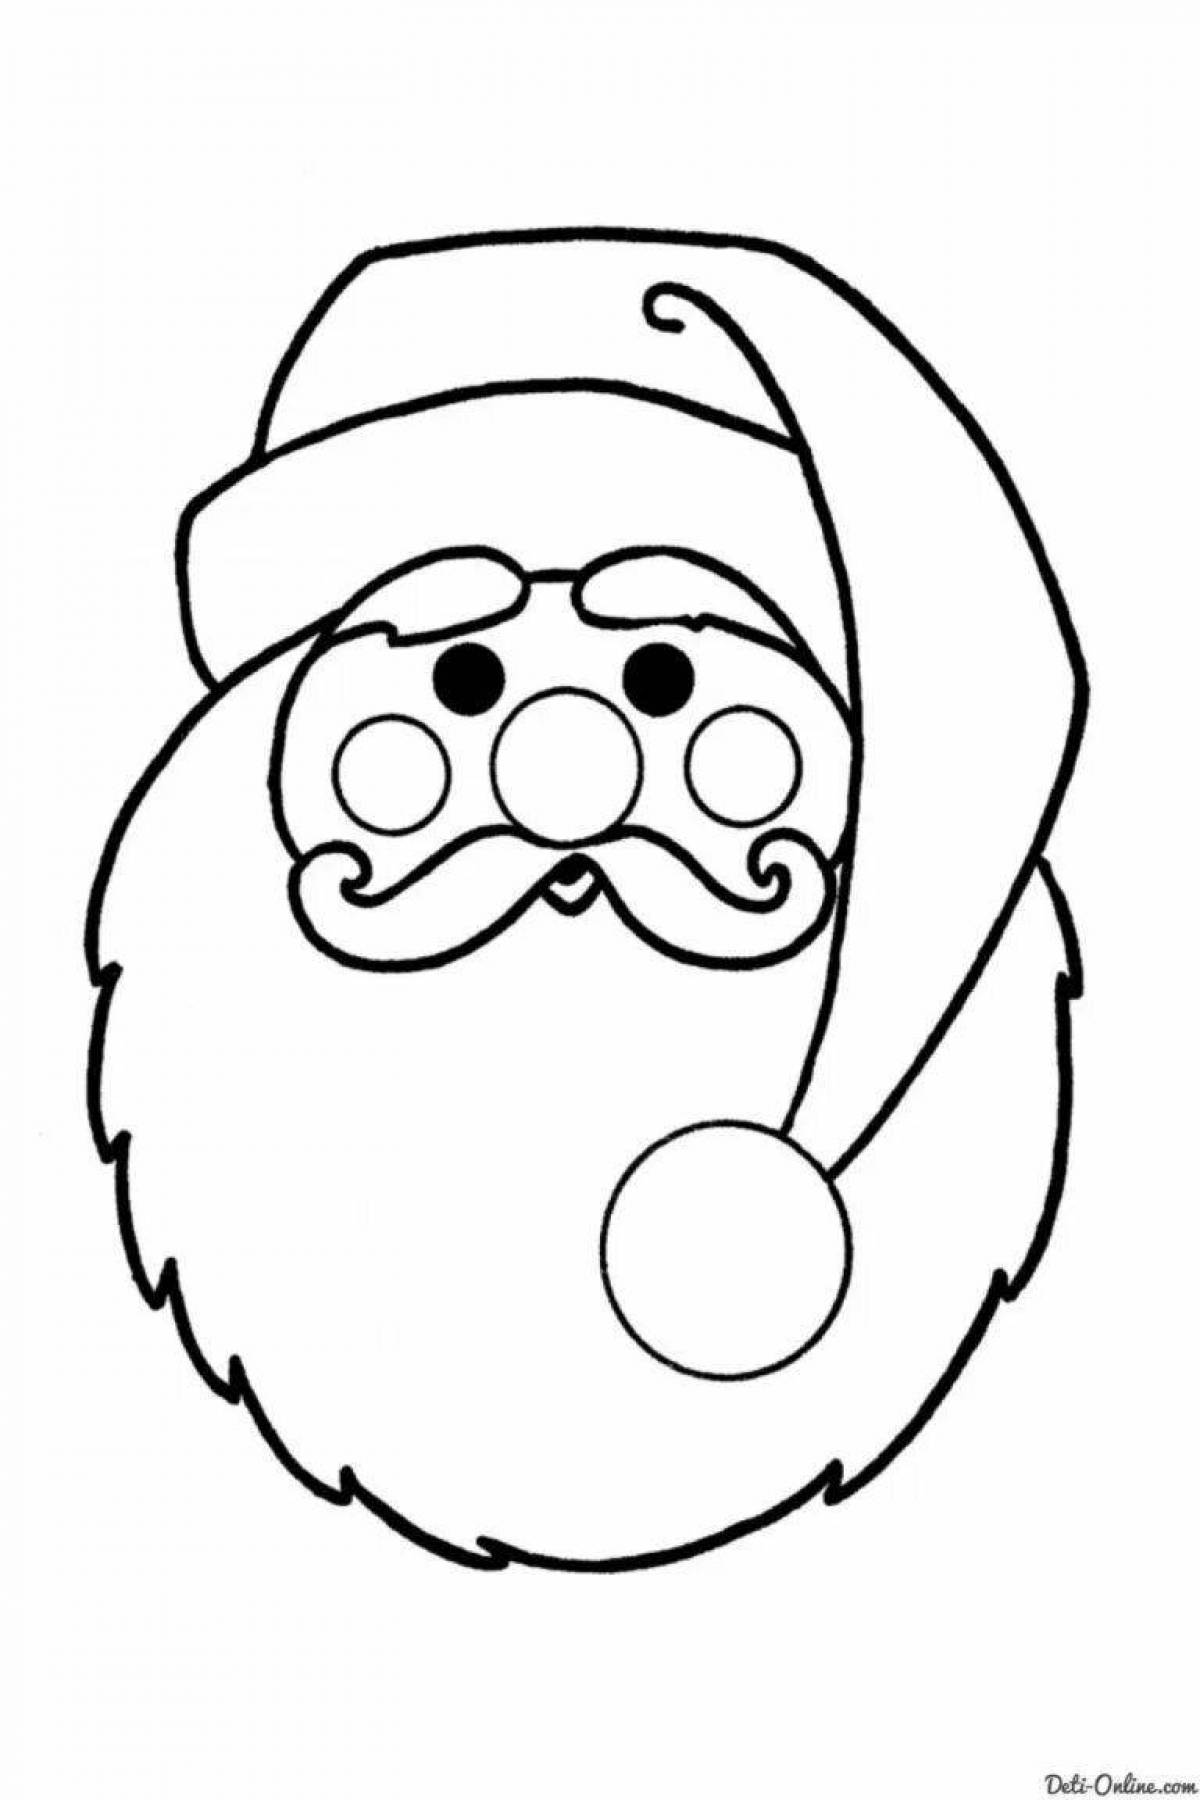 Playful Santa Claus coloring book for 2-3 year olds